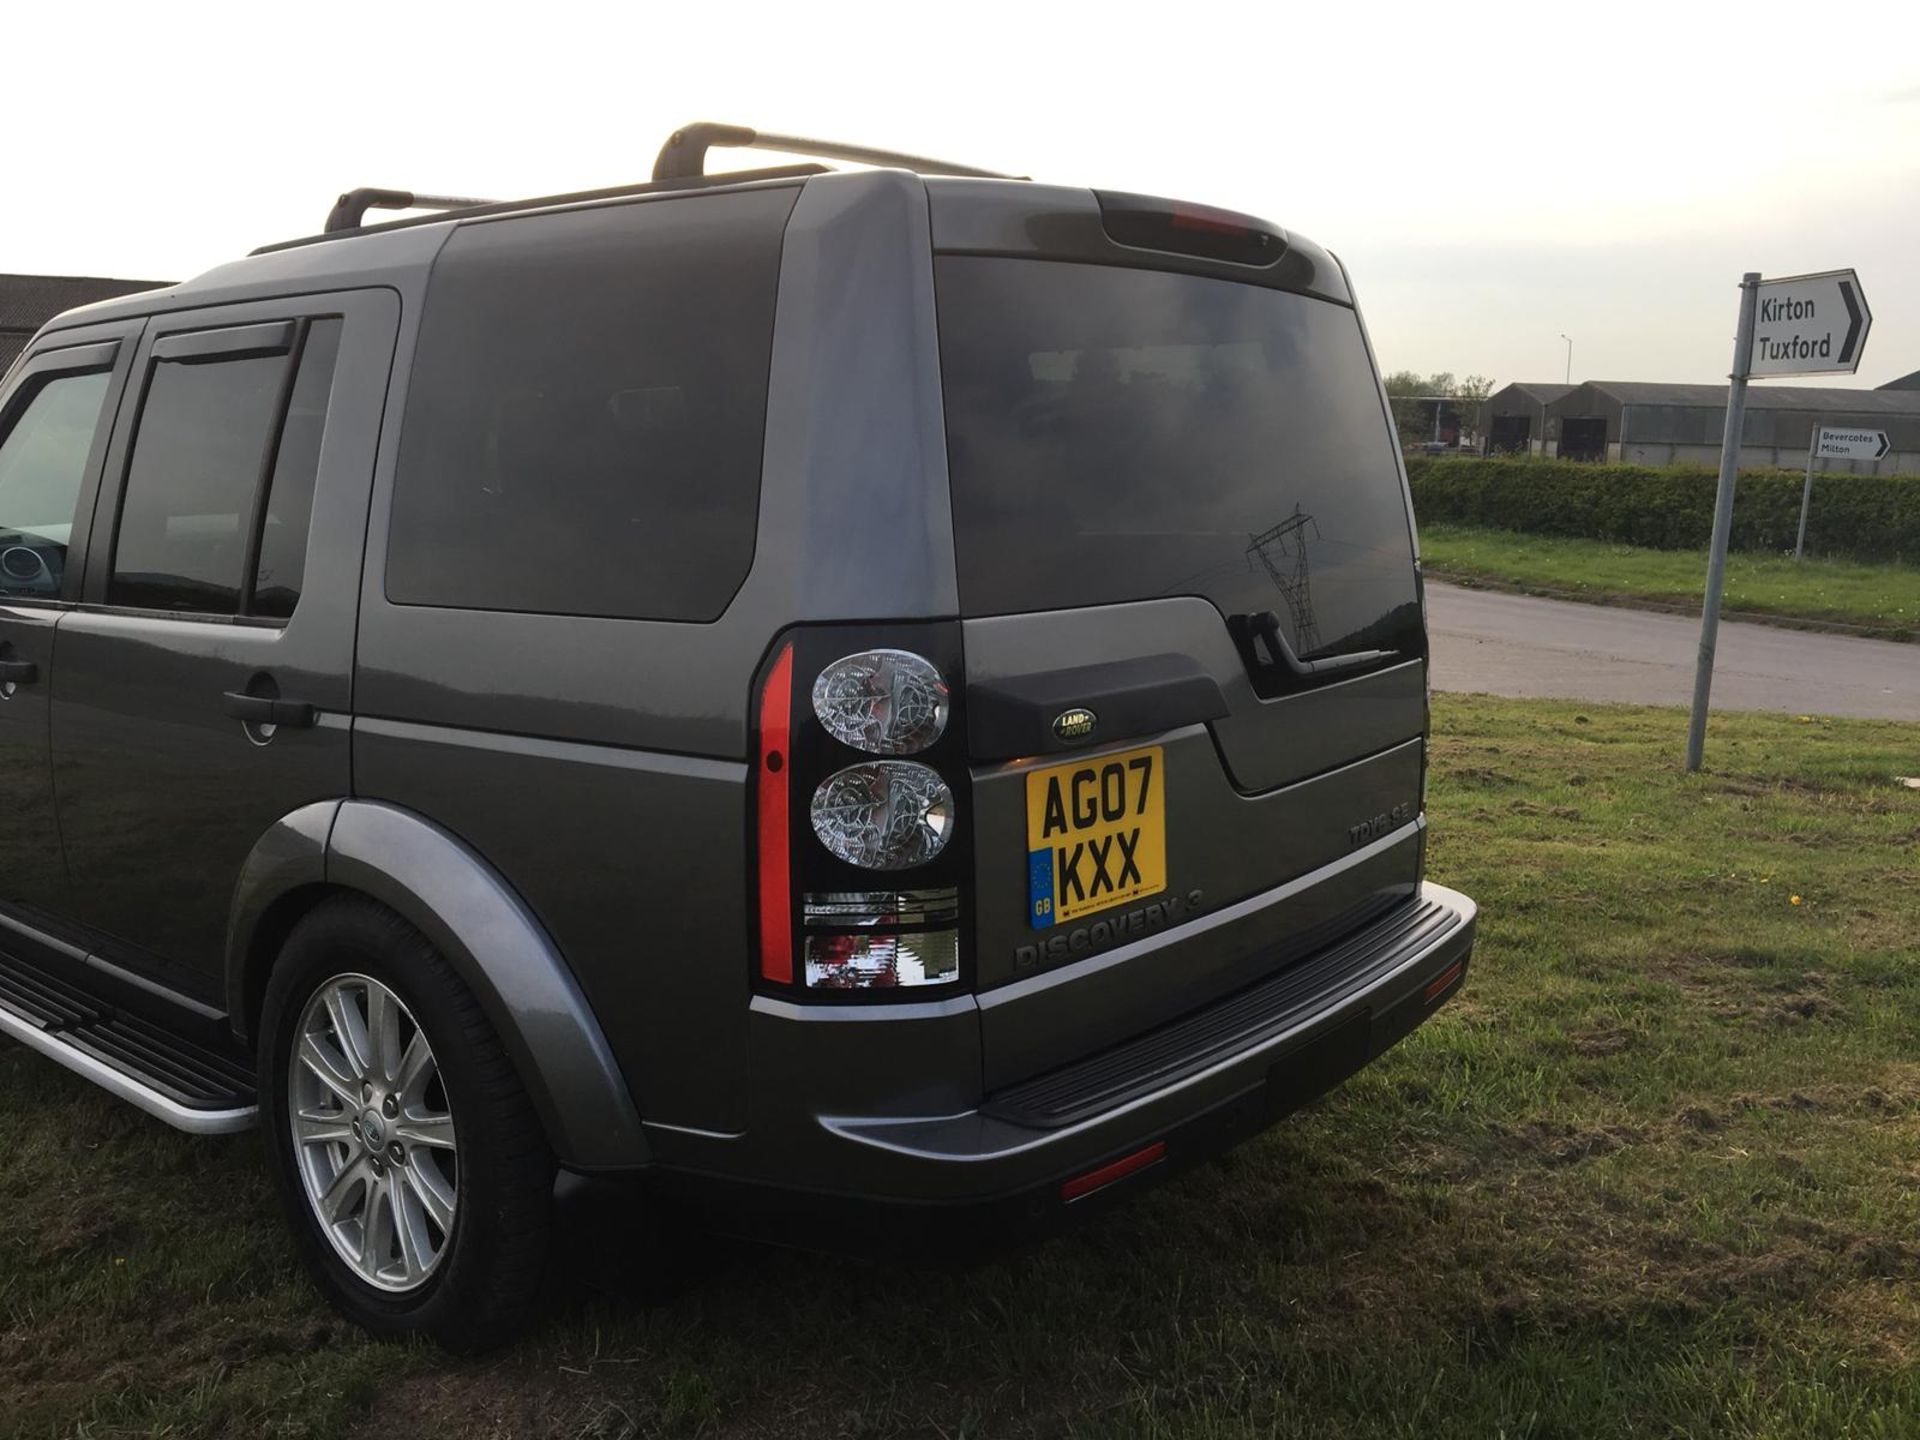 2007/07 REG LAND ROVER DISCOVERY 3 TDV6 SE AUTOMATIC 2.7 DIESEL 4X4, 7 SEAT FACELIFT LIGHTS *NO VAT* - Image 6 of 16